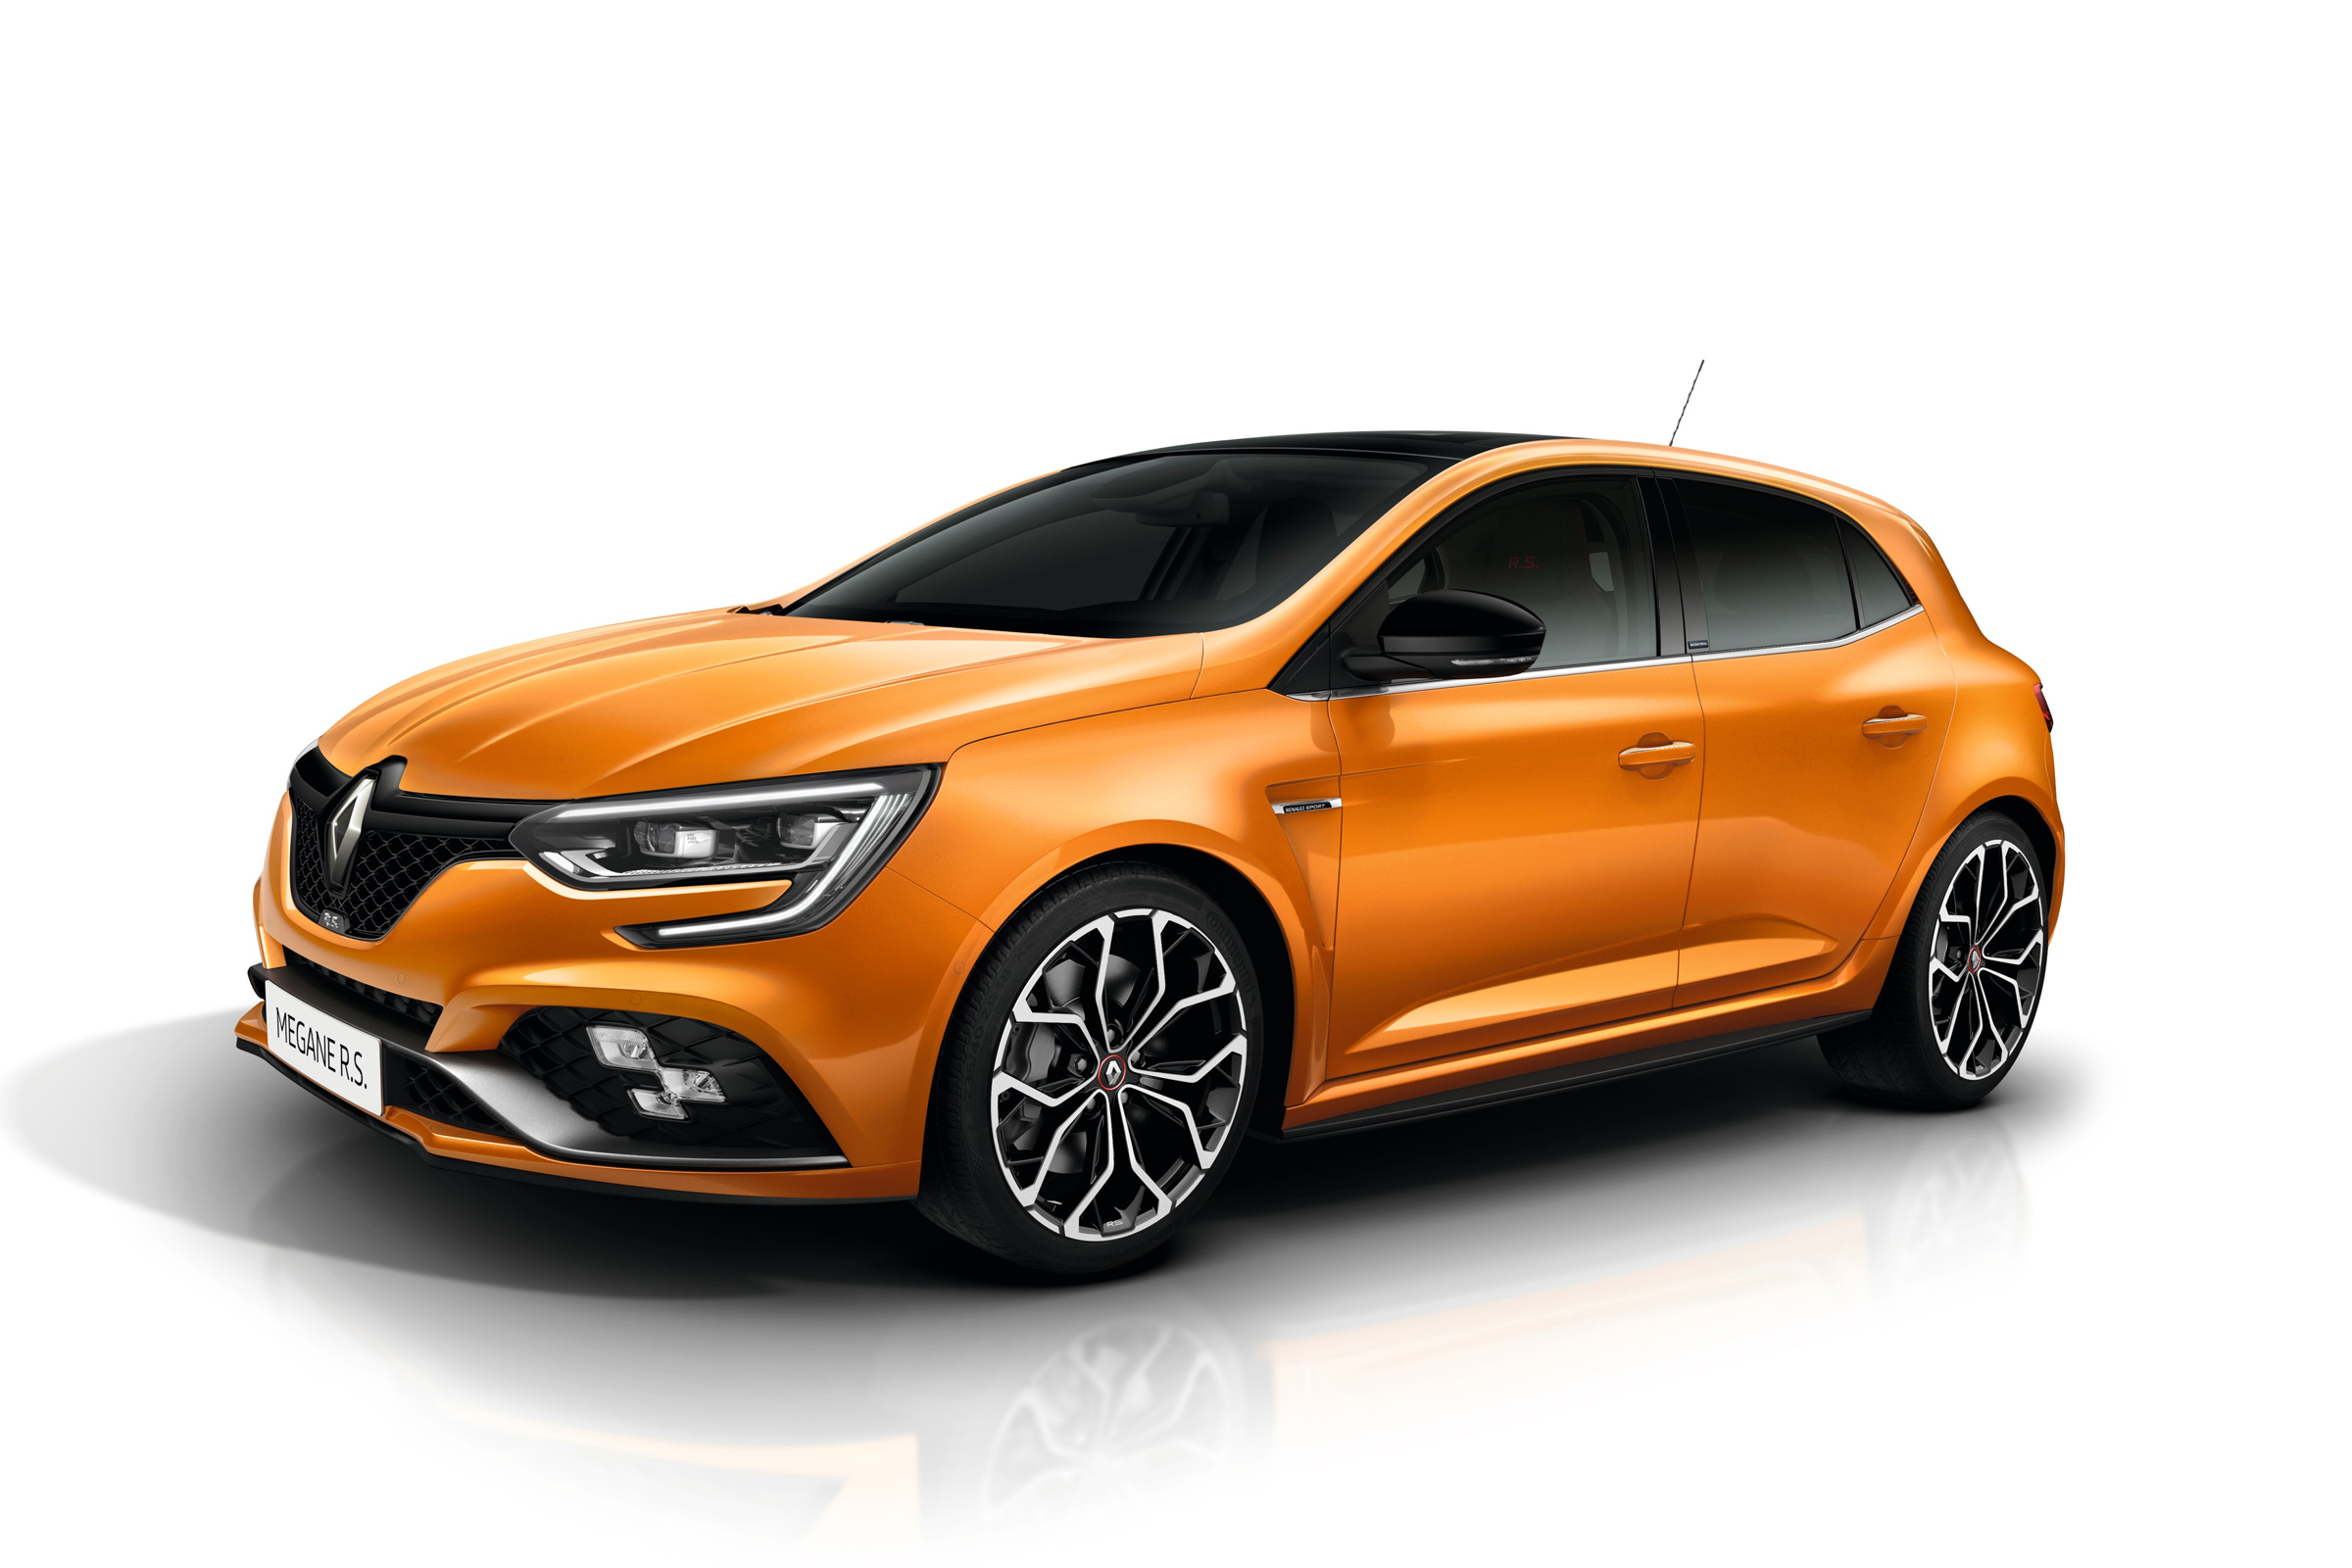 276bhp Renault Megane RS hot hatch on sale from £27,495